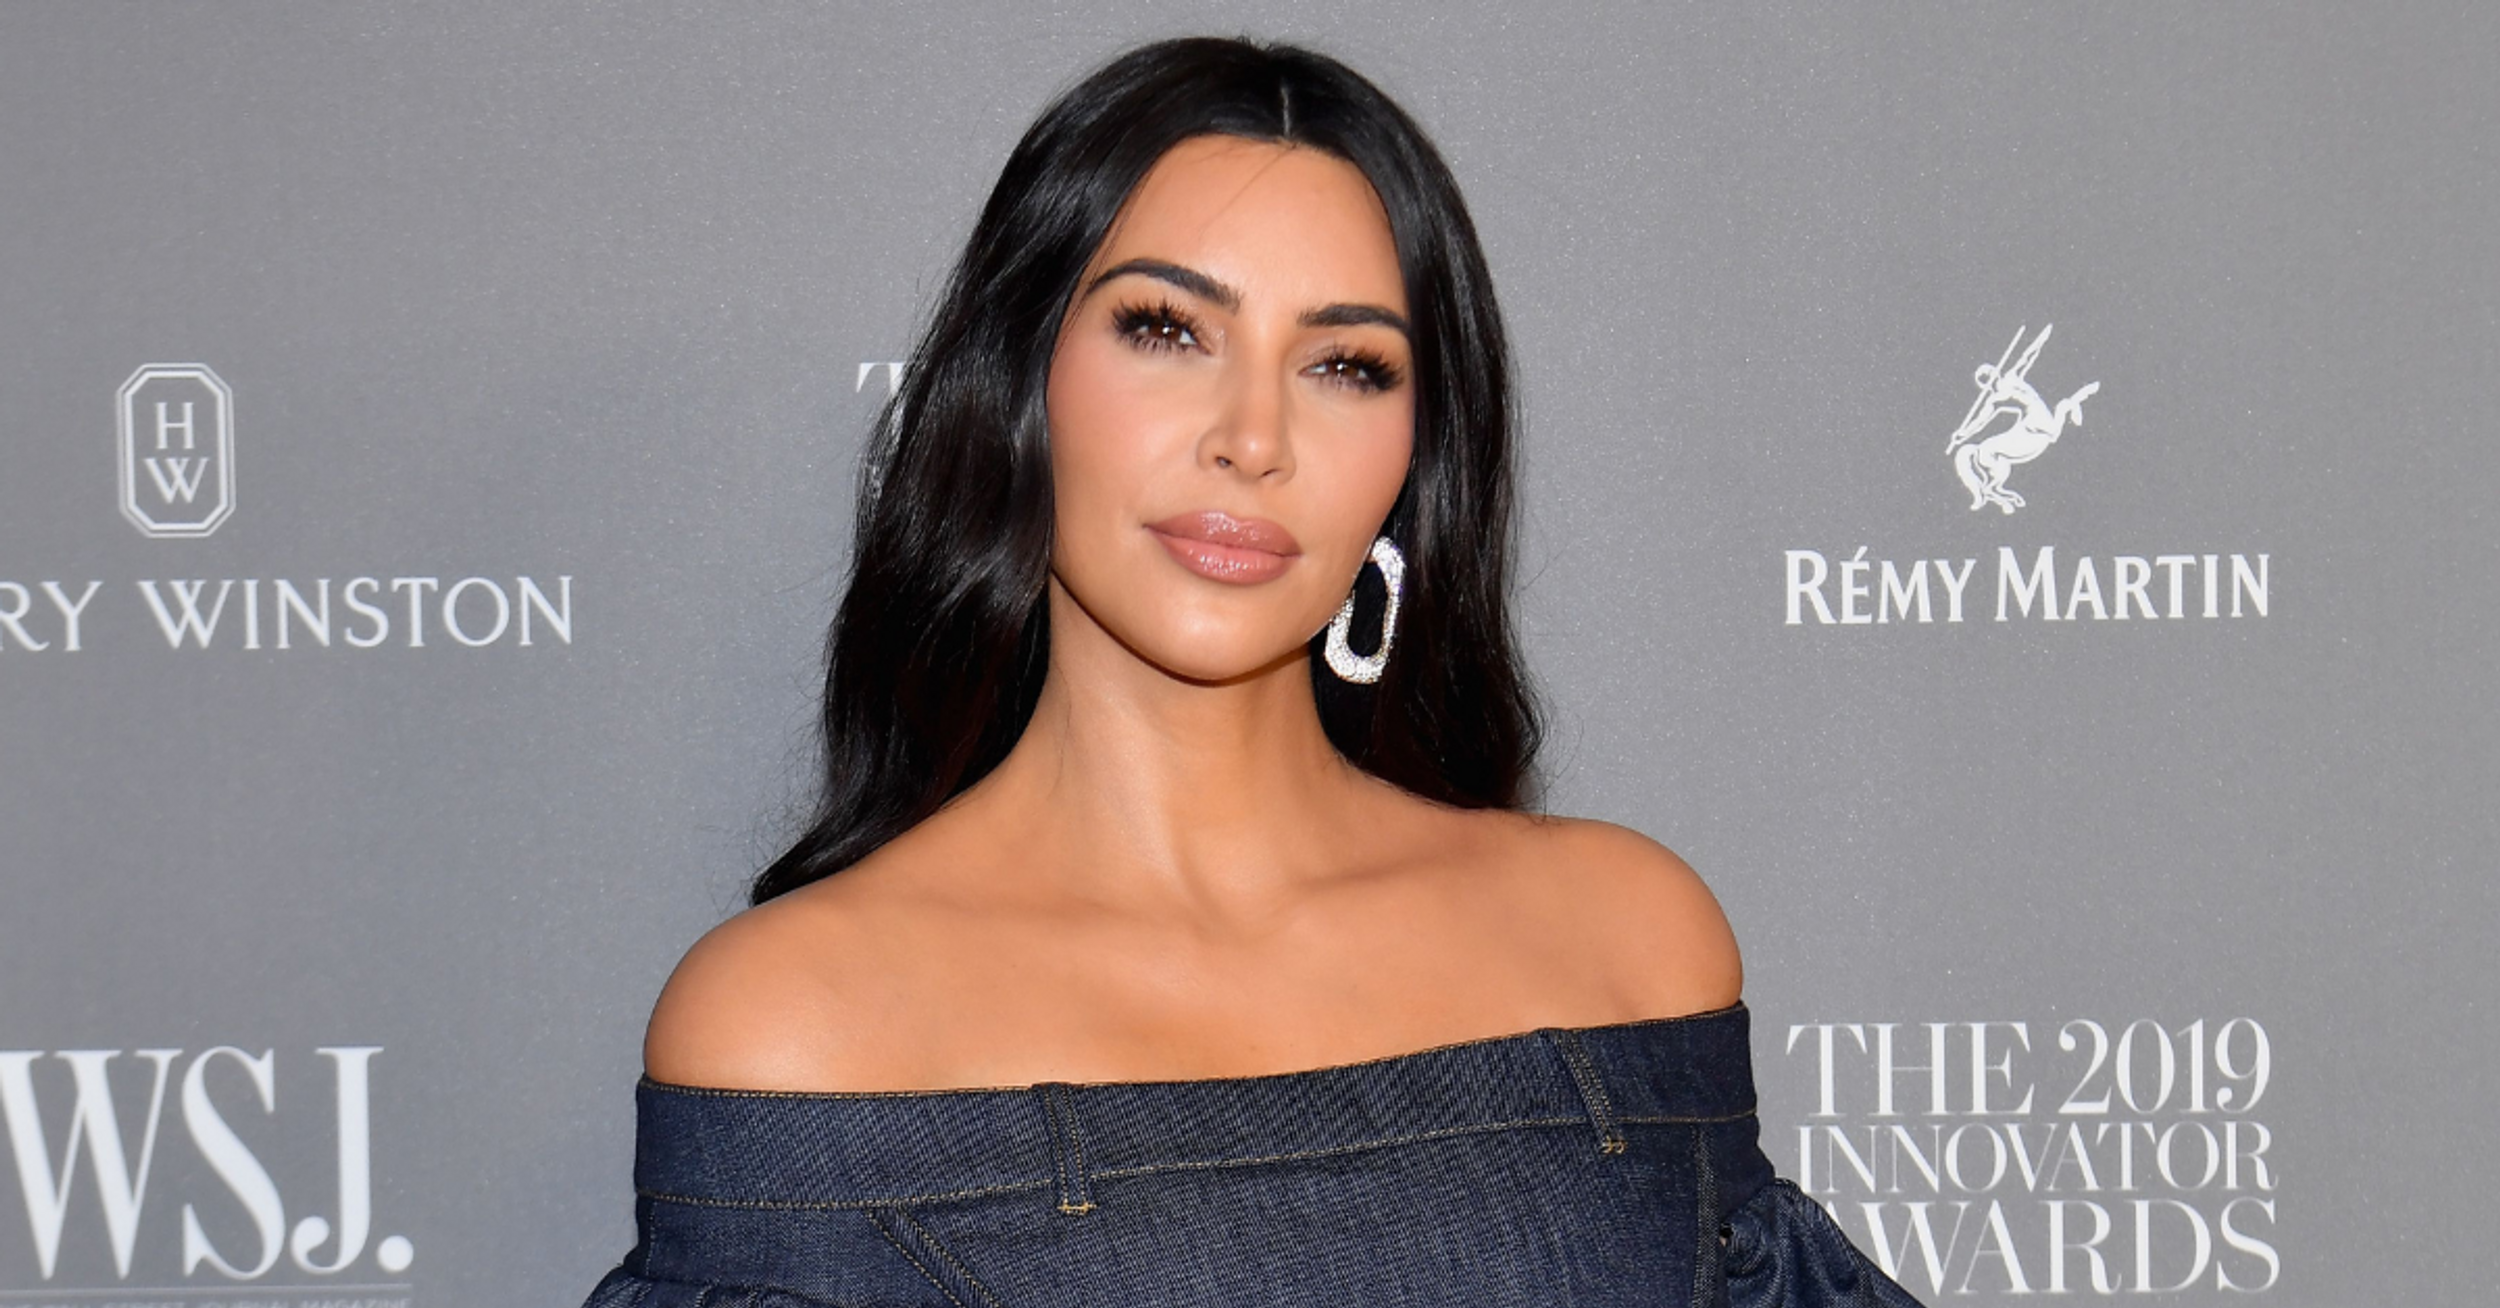 Kim Kardashian Called Out Hard After She Offered Some Tone-Deaf 'Advice For Women In Business'